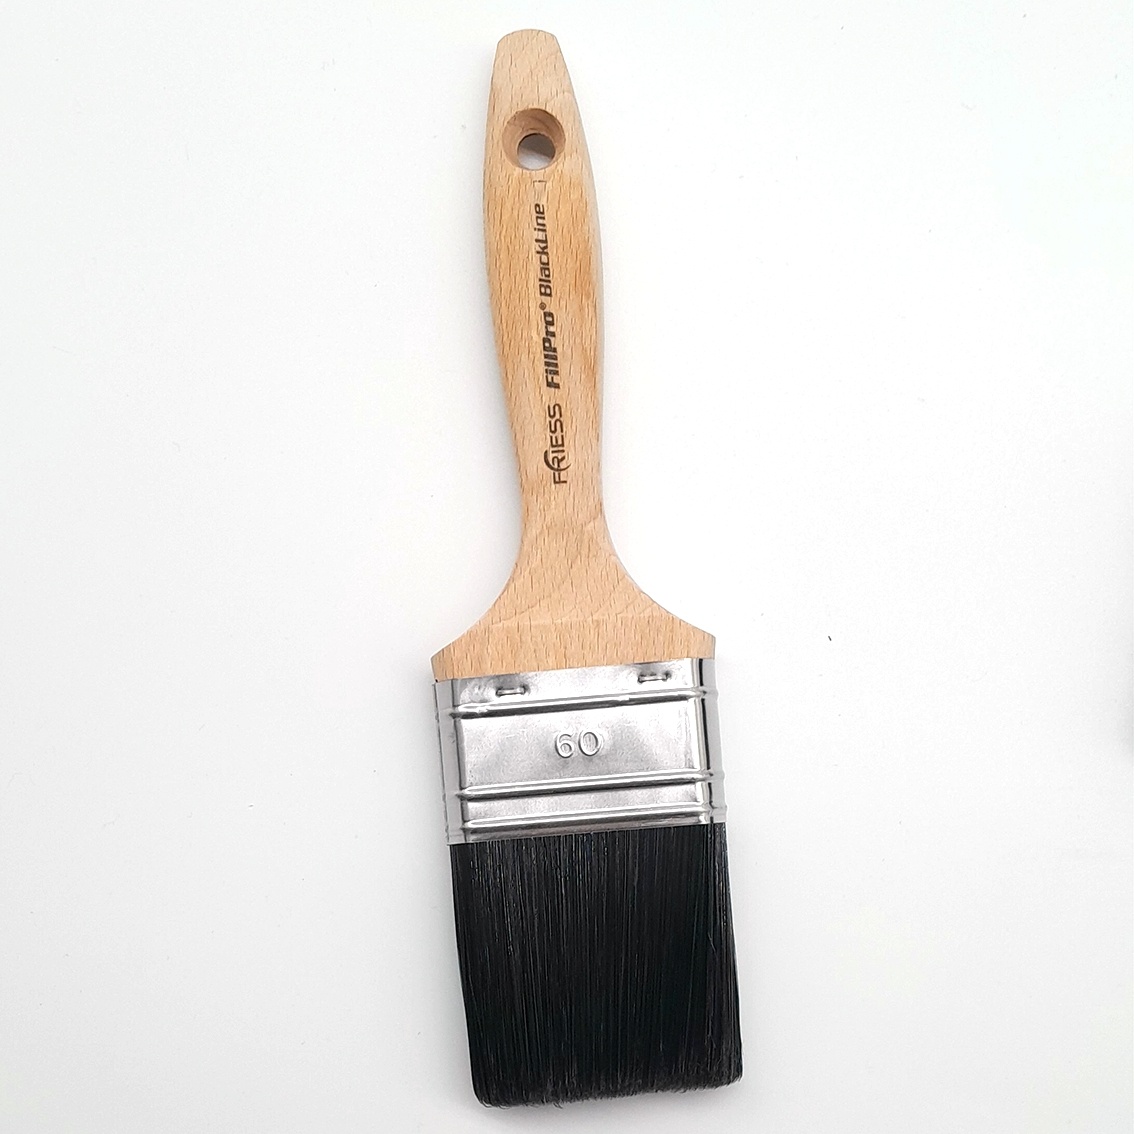 ORA-Universal Paint Brushes - width: 60 mm